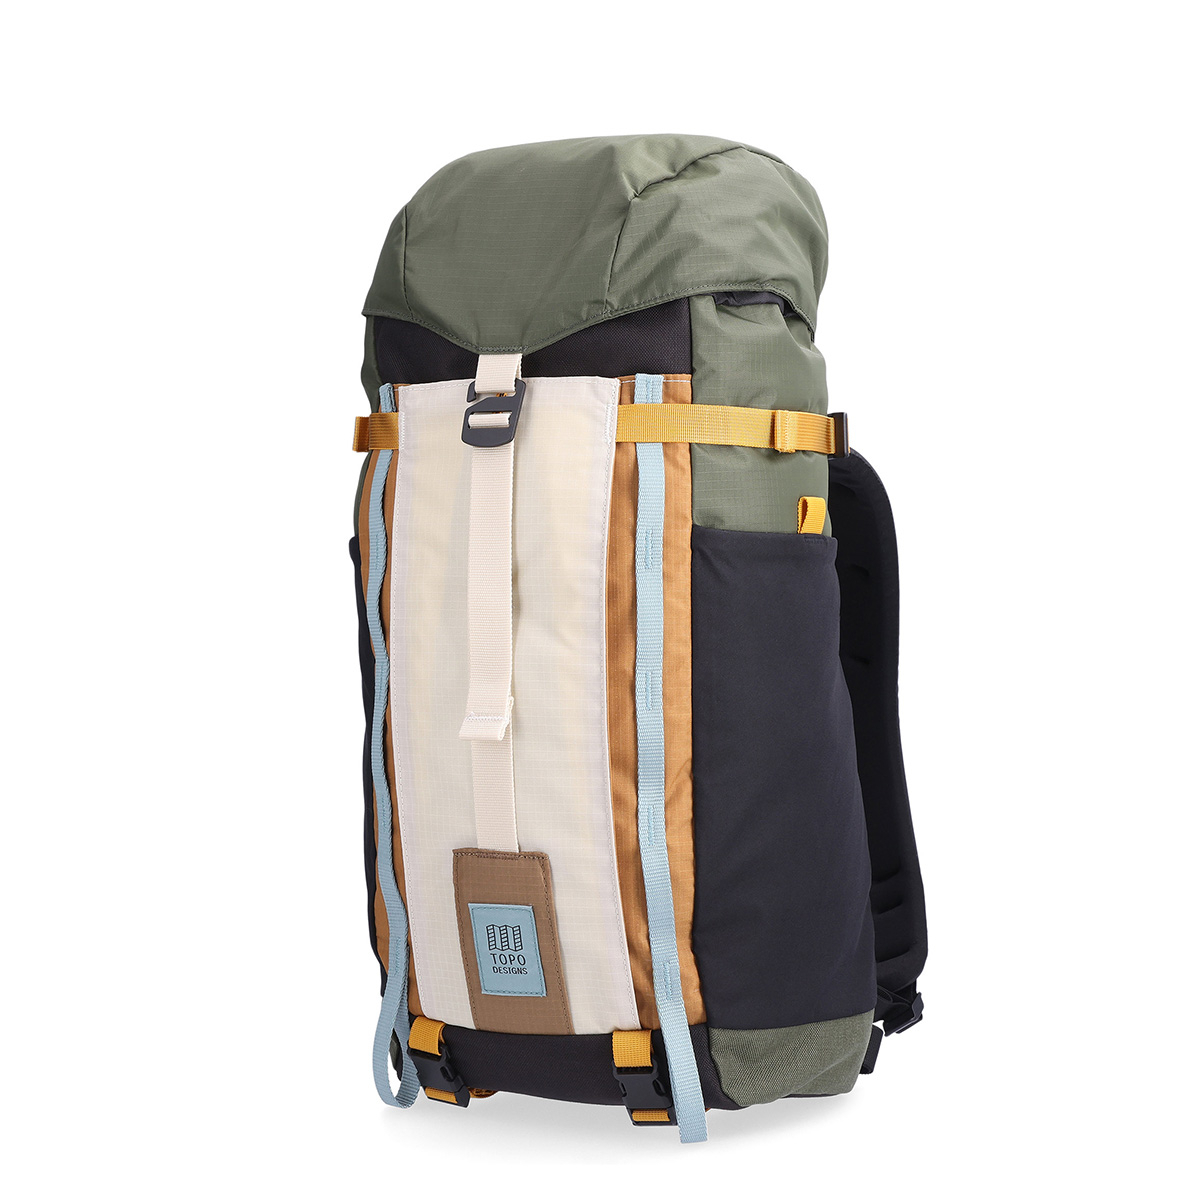 Why Do We Have Women's Specific Backpacking Packs? | Decathlon